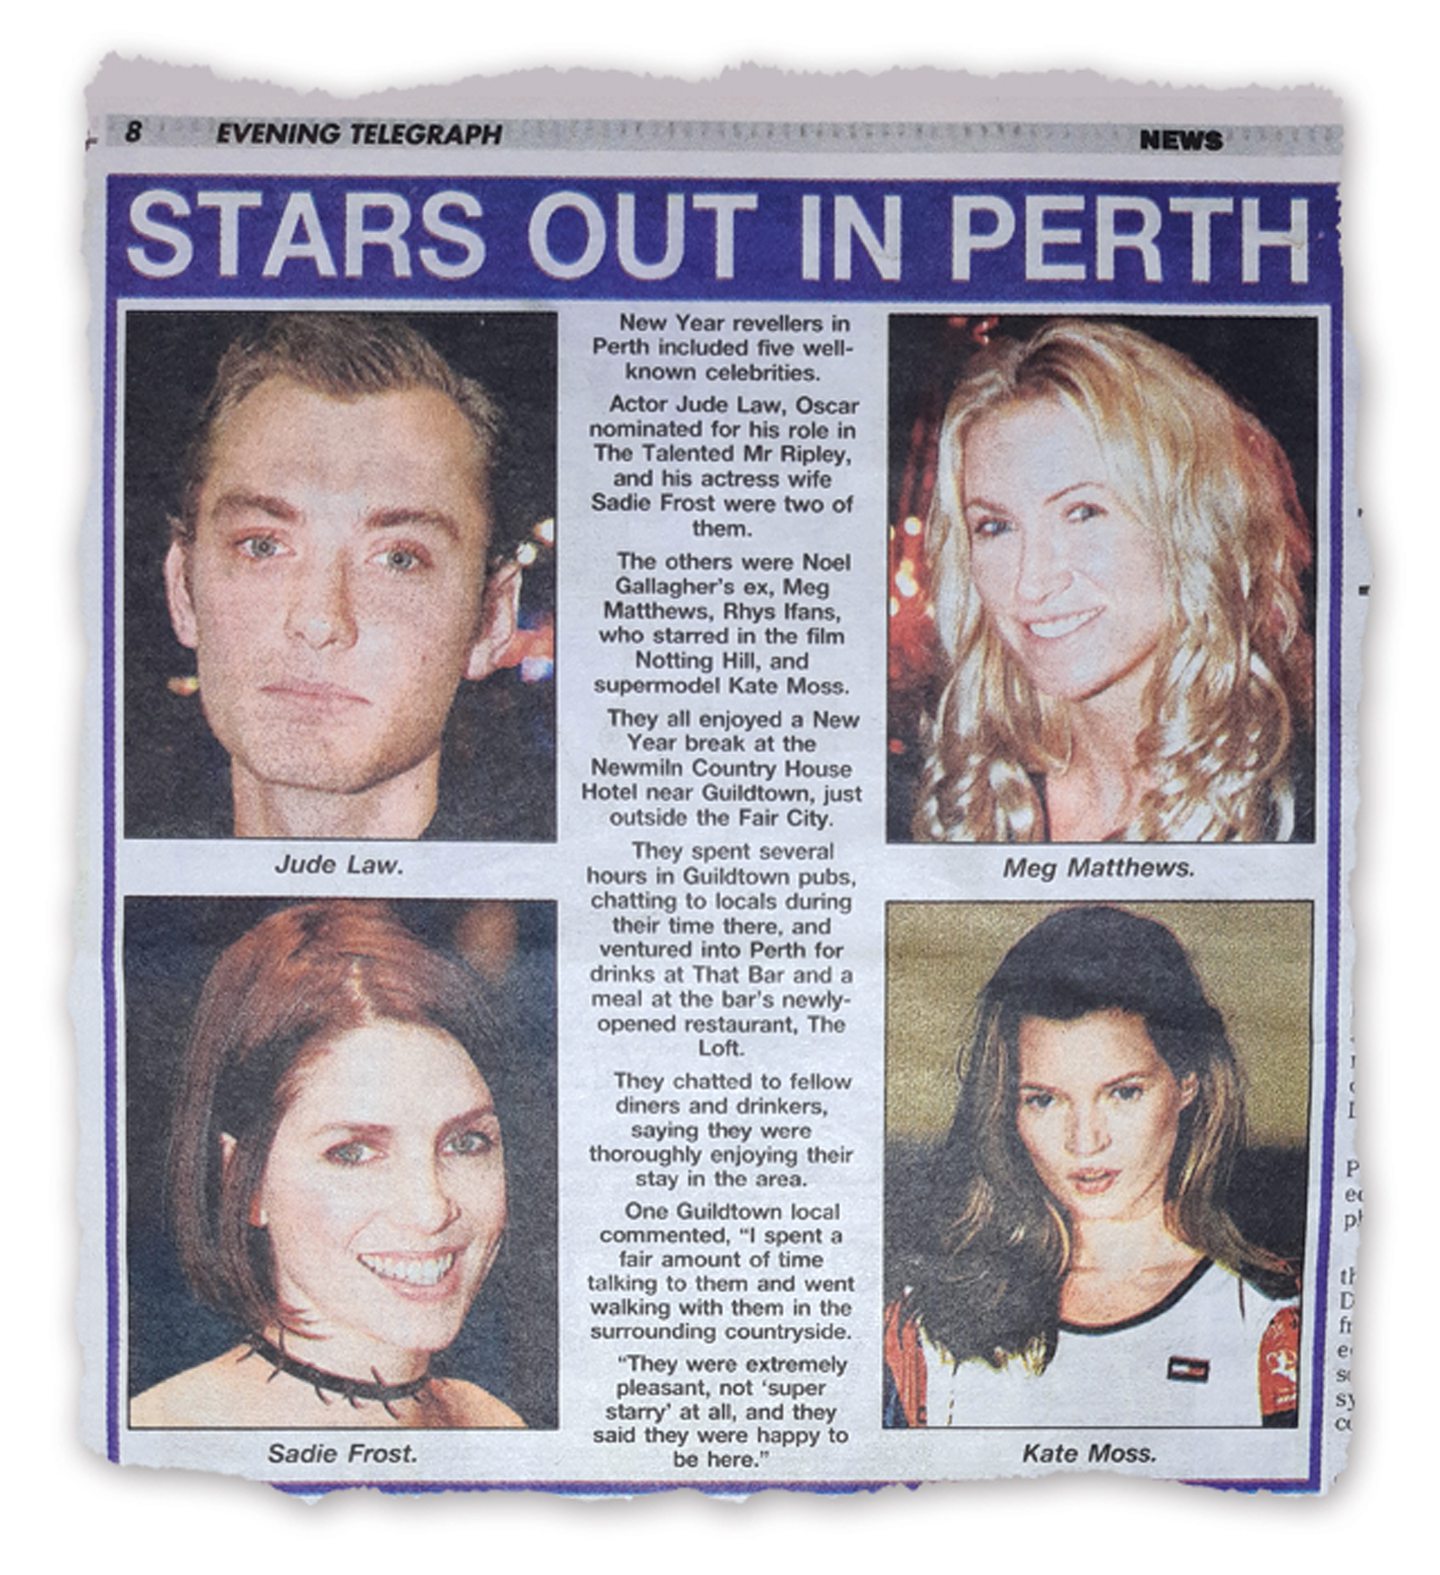 A newspaper clipping with pictures of Jude Law, Meg Matthews, Sadie Frost and Kate Moss, showing how James wrote his piece for the Evening Telegraph.